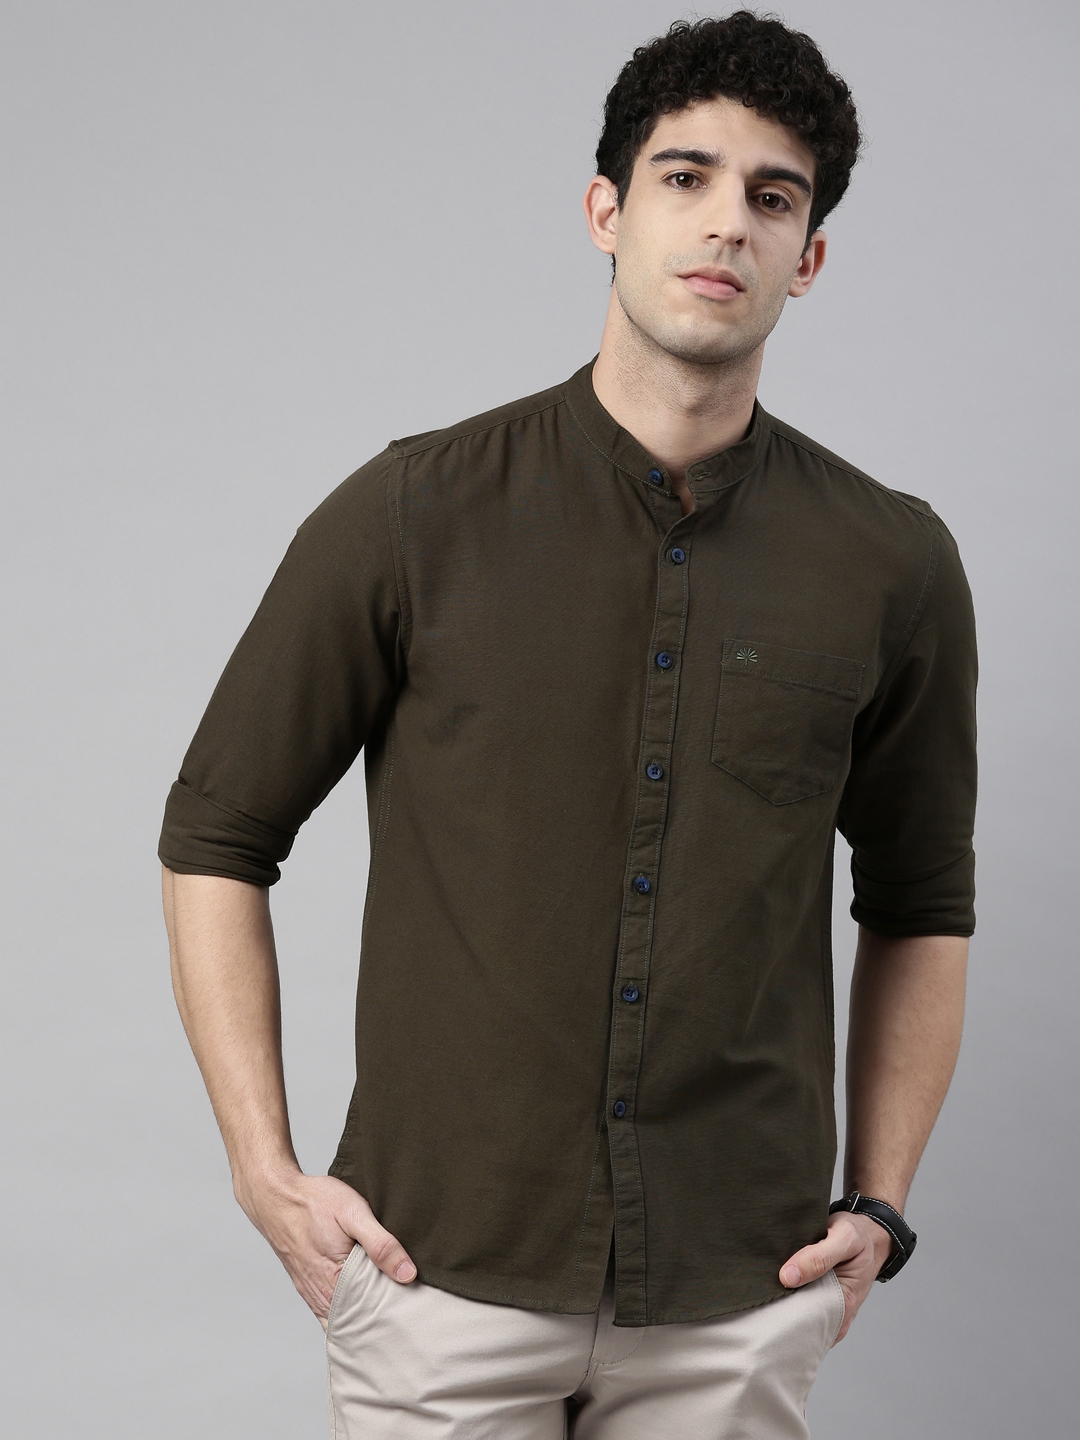 Chennis | Chennis Mens 100% Cotton Solid Chest Pocket Casual Shirt